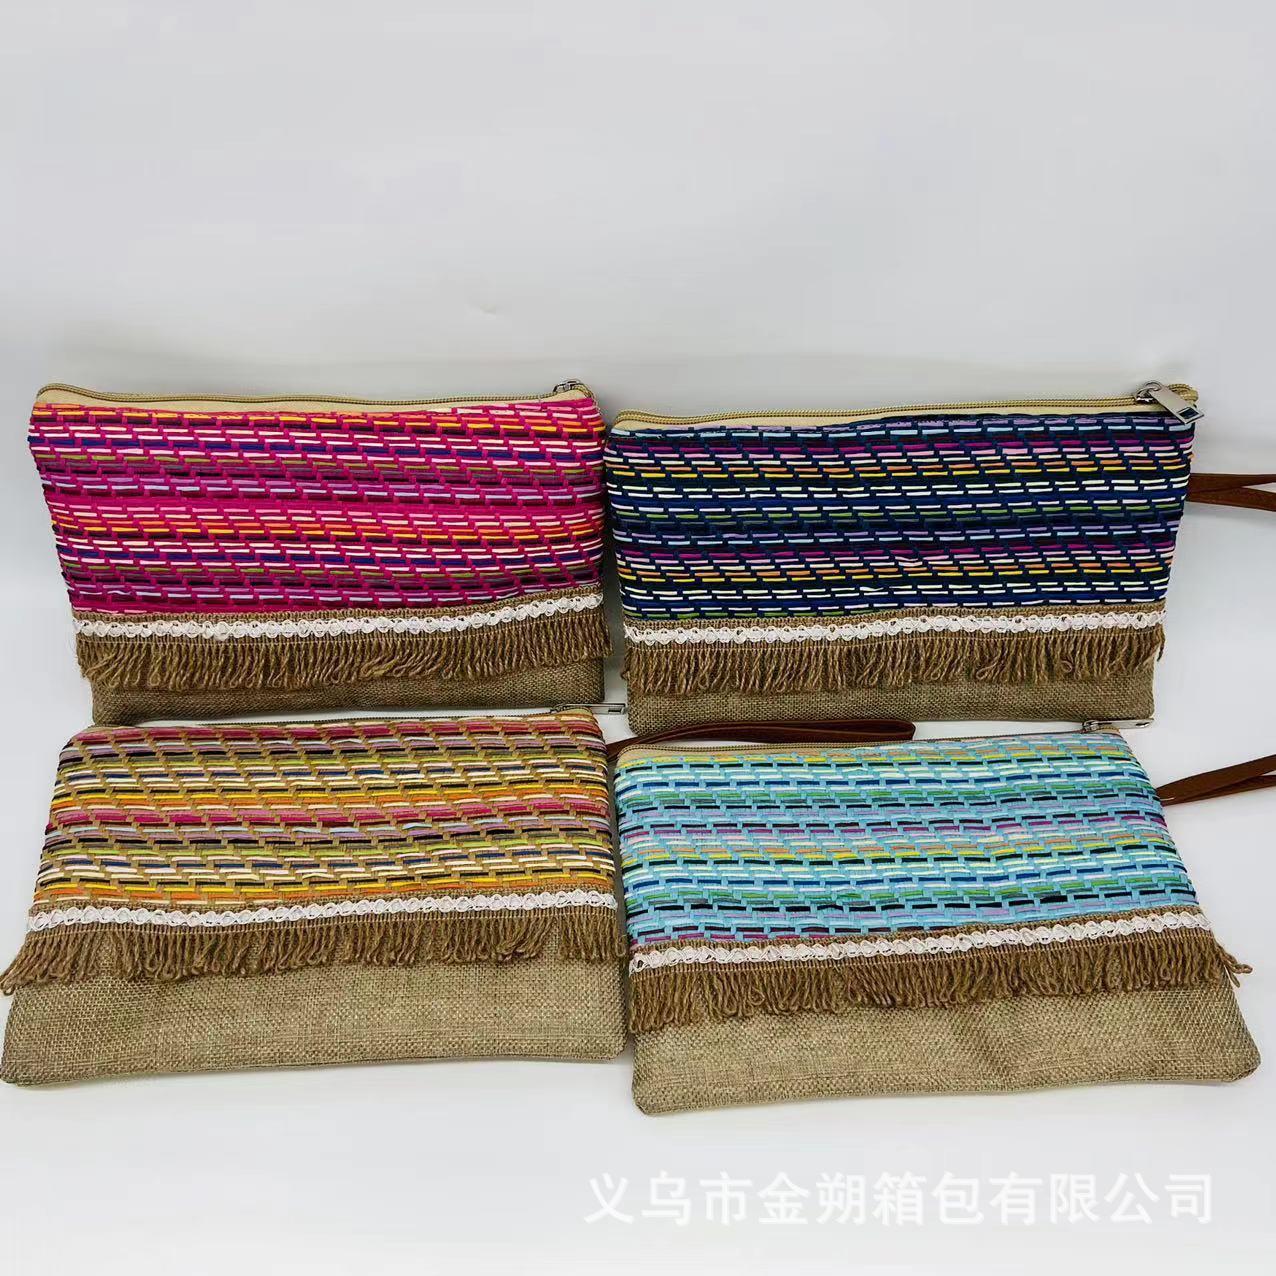 New Double-Sided Cotton and Linen Straw Tassel Striped Bag Clutch Bag Small Bag Cosmetic Bag Mobile Phone Bag Coin Pocket